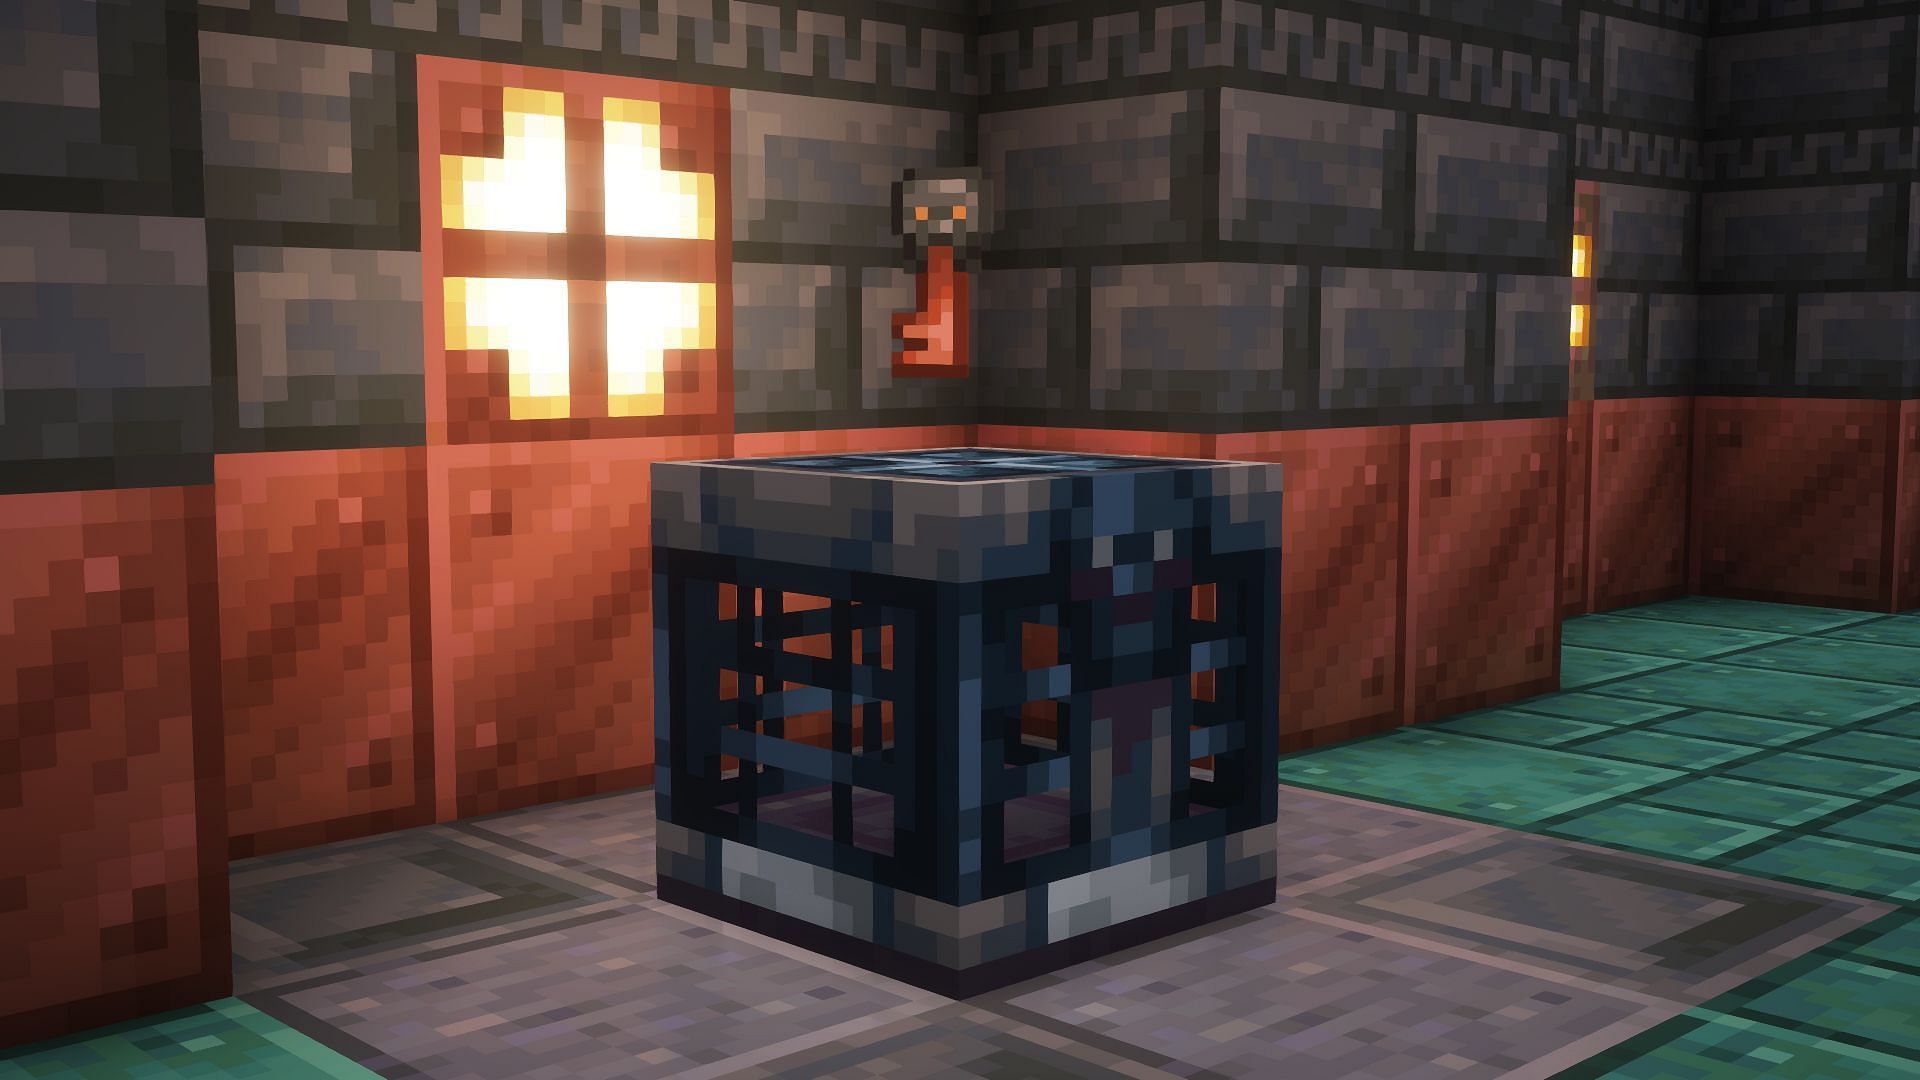 Are demo chambers in Minecraft Bedrock?